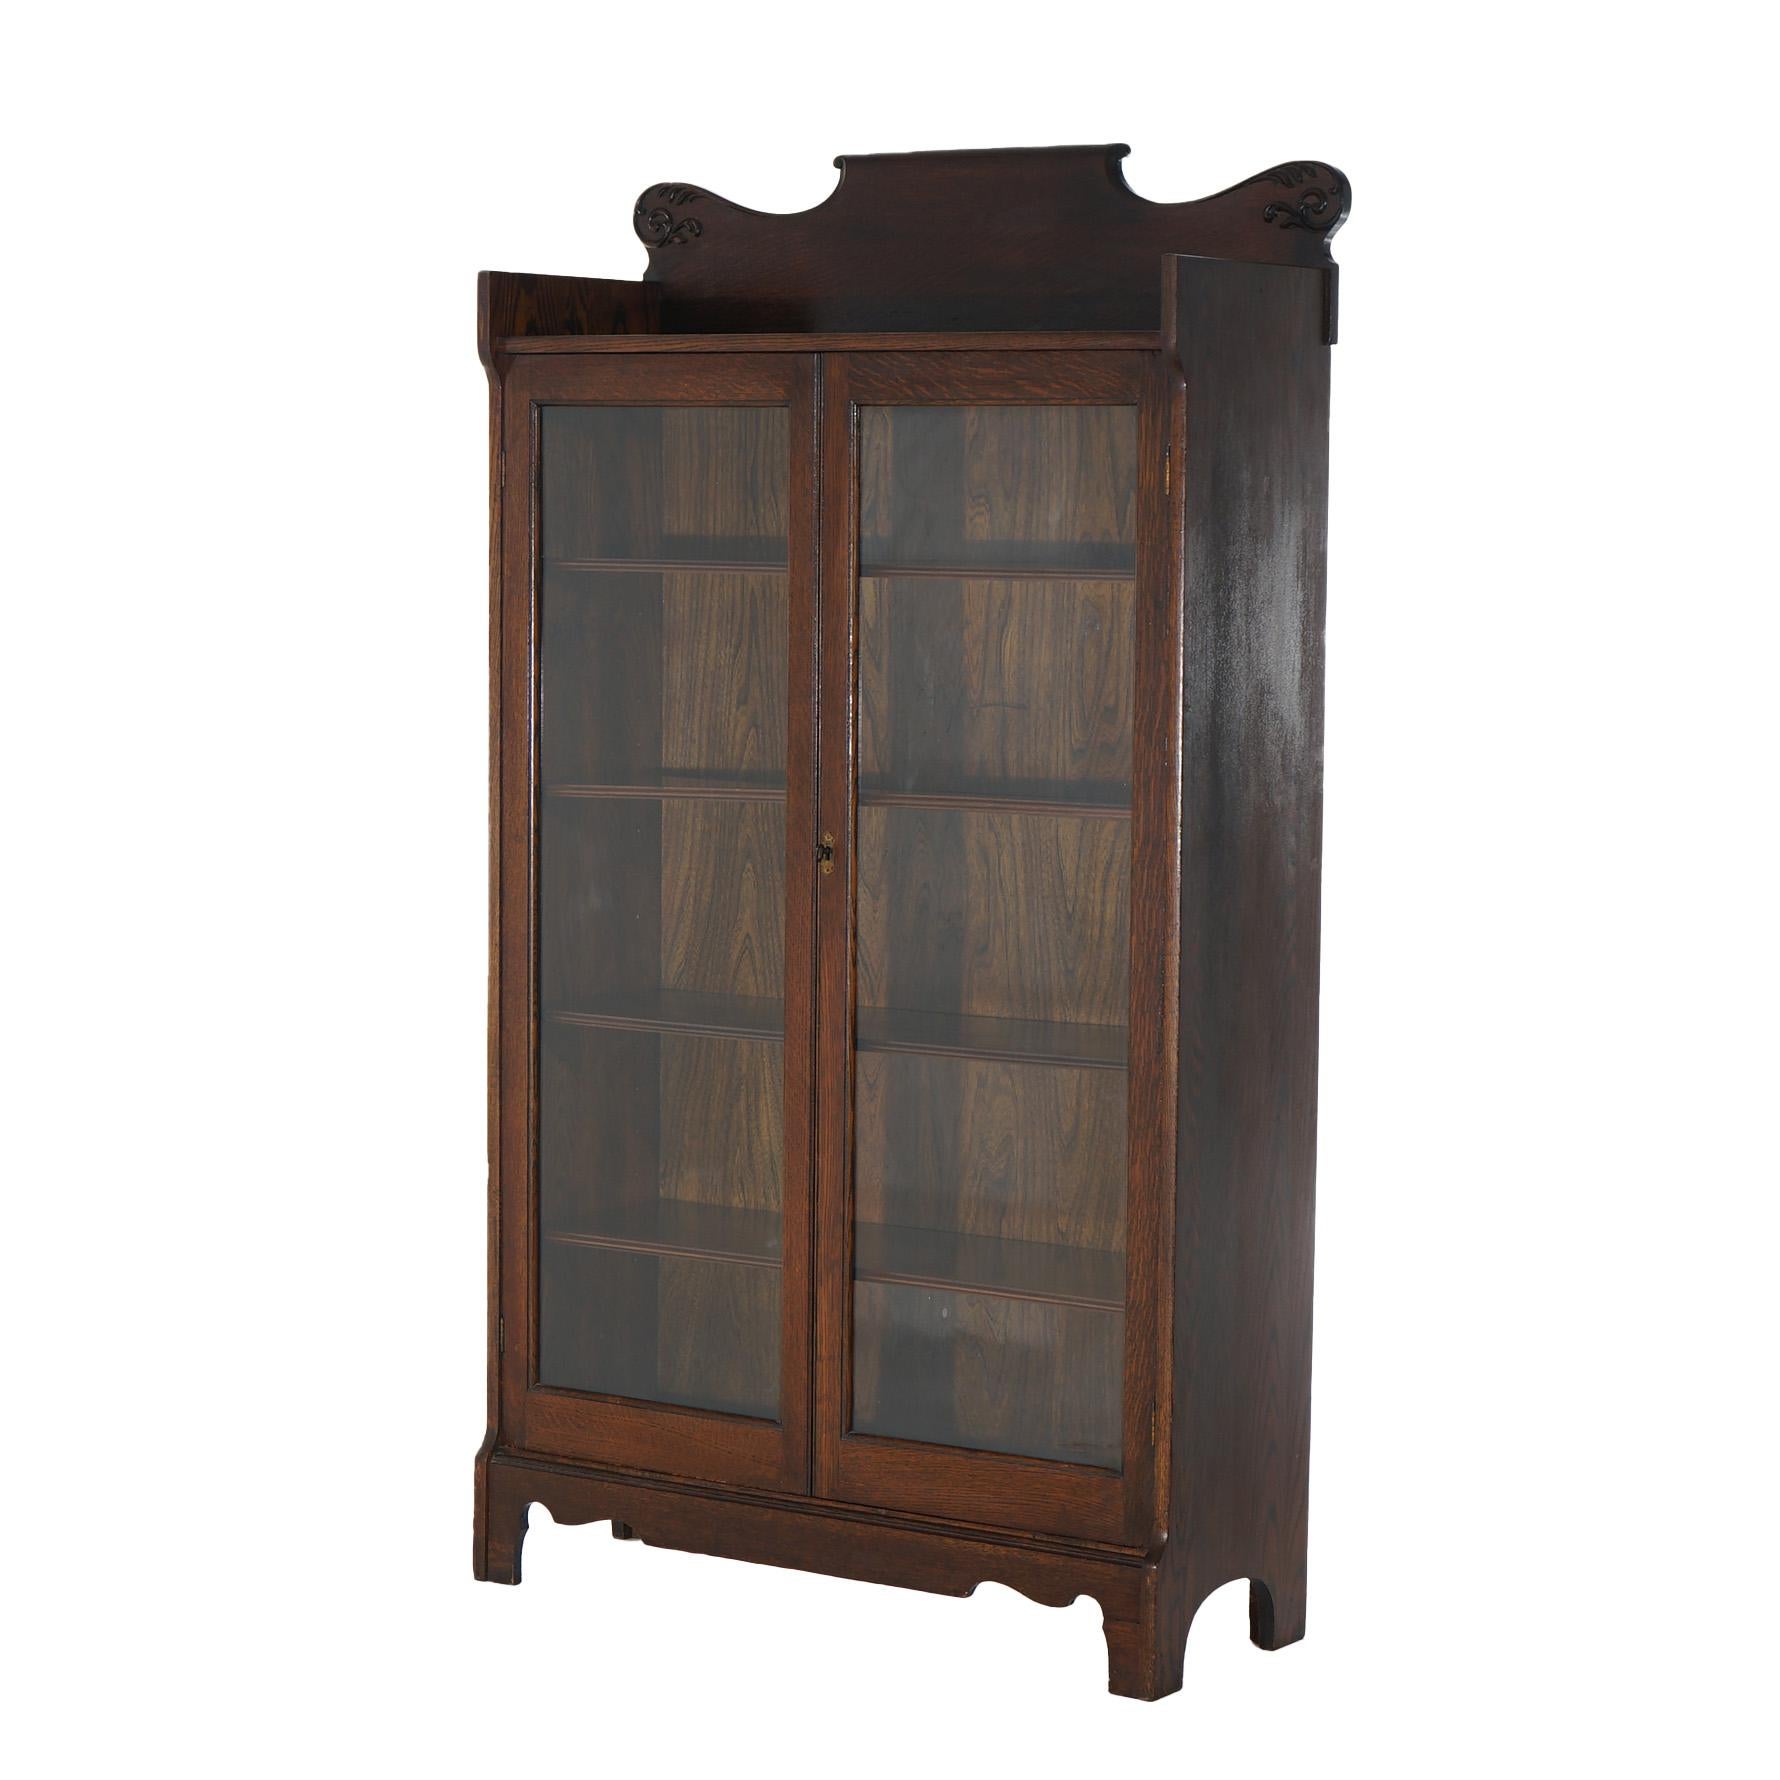 An antique Arts and Crafts bookcase offers oak construction with shaped crest over case having double glass doors opening to shelved interior, raised on stylized bracket feet, c1910

Measures - 64